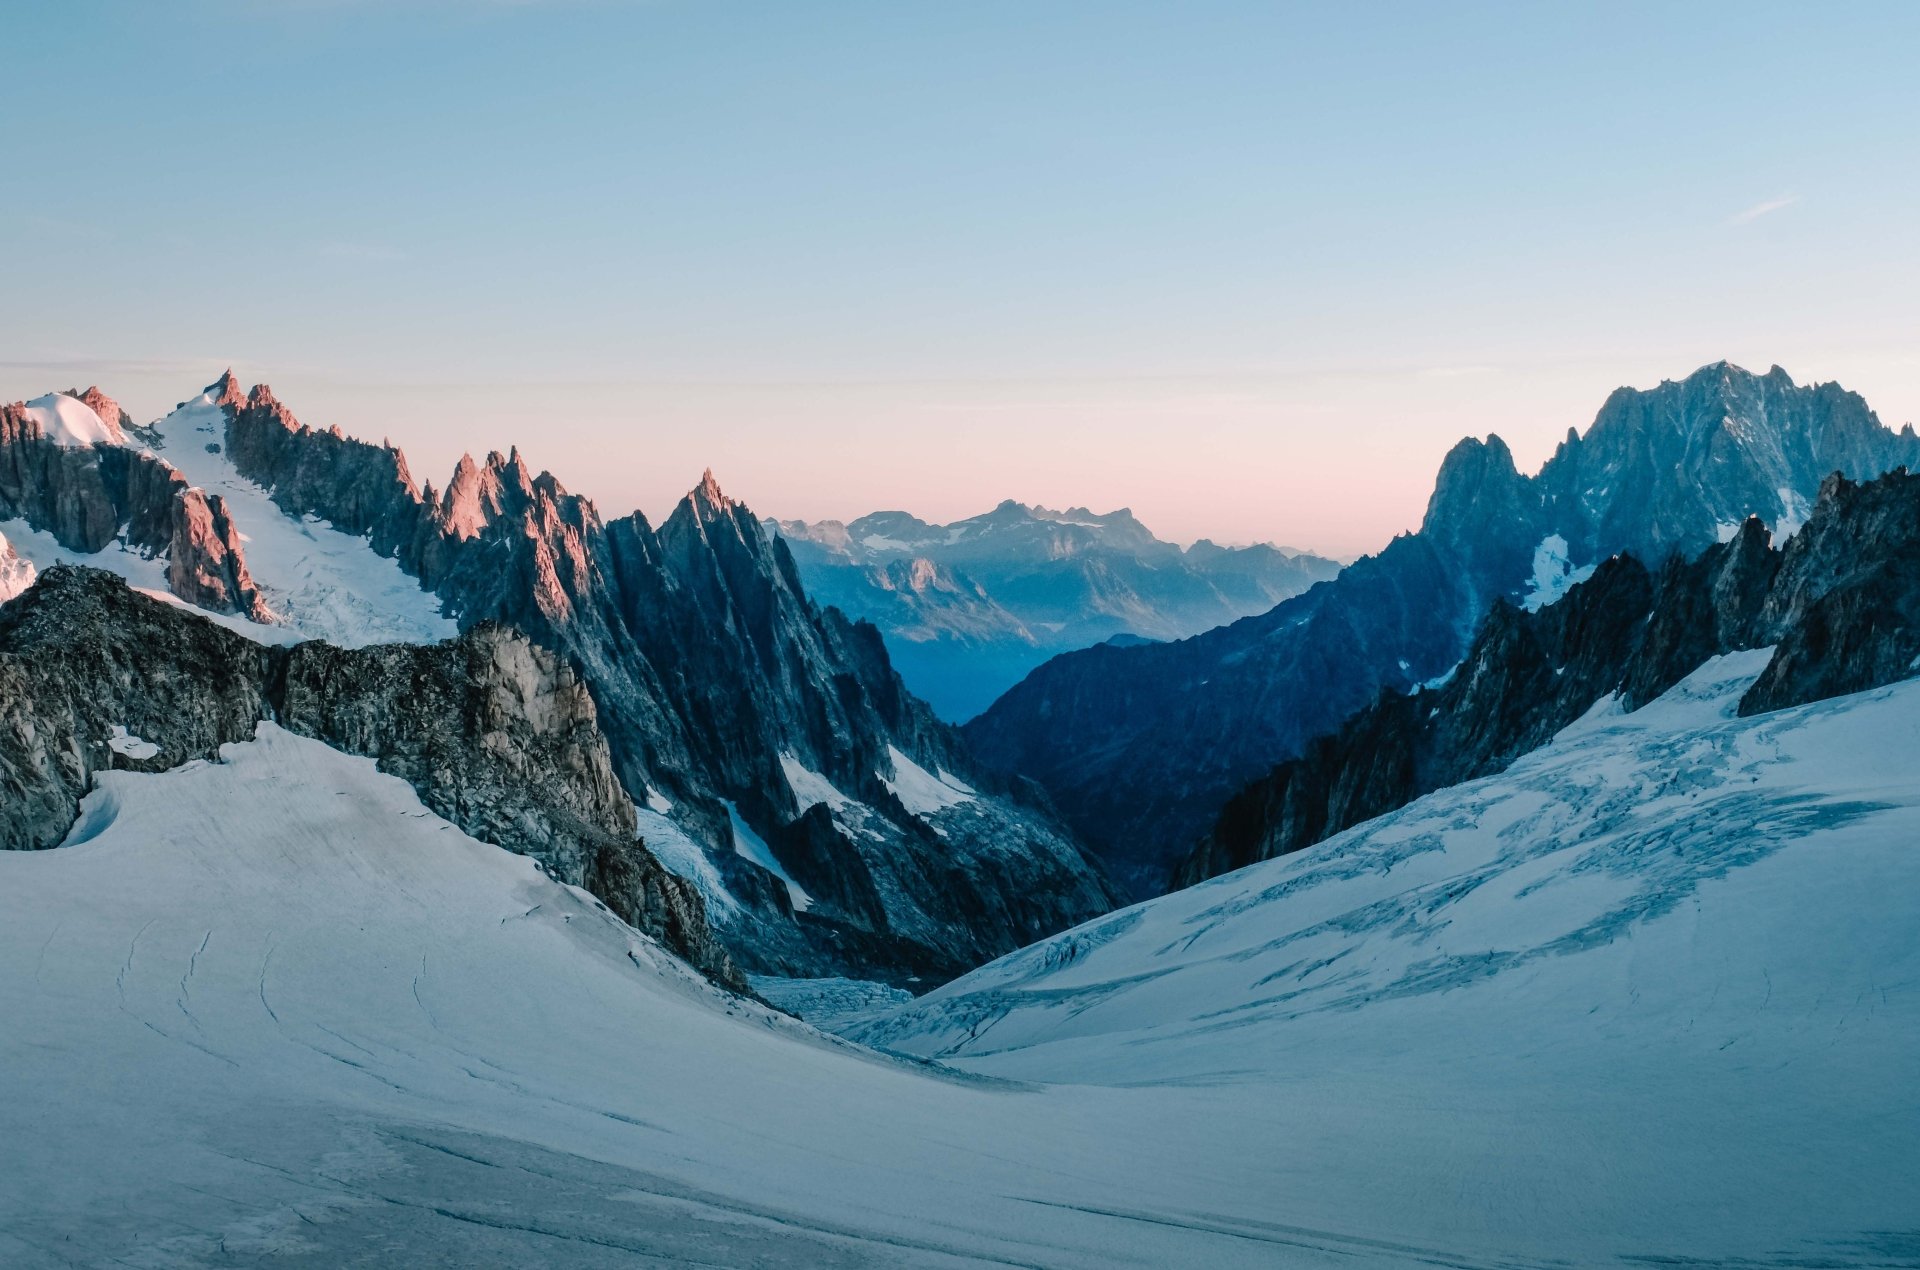 Photo Of Snow Capped Mountains During Dawn Image - ID: 317544 - Image Abyss